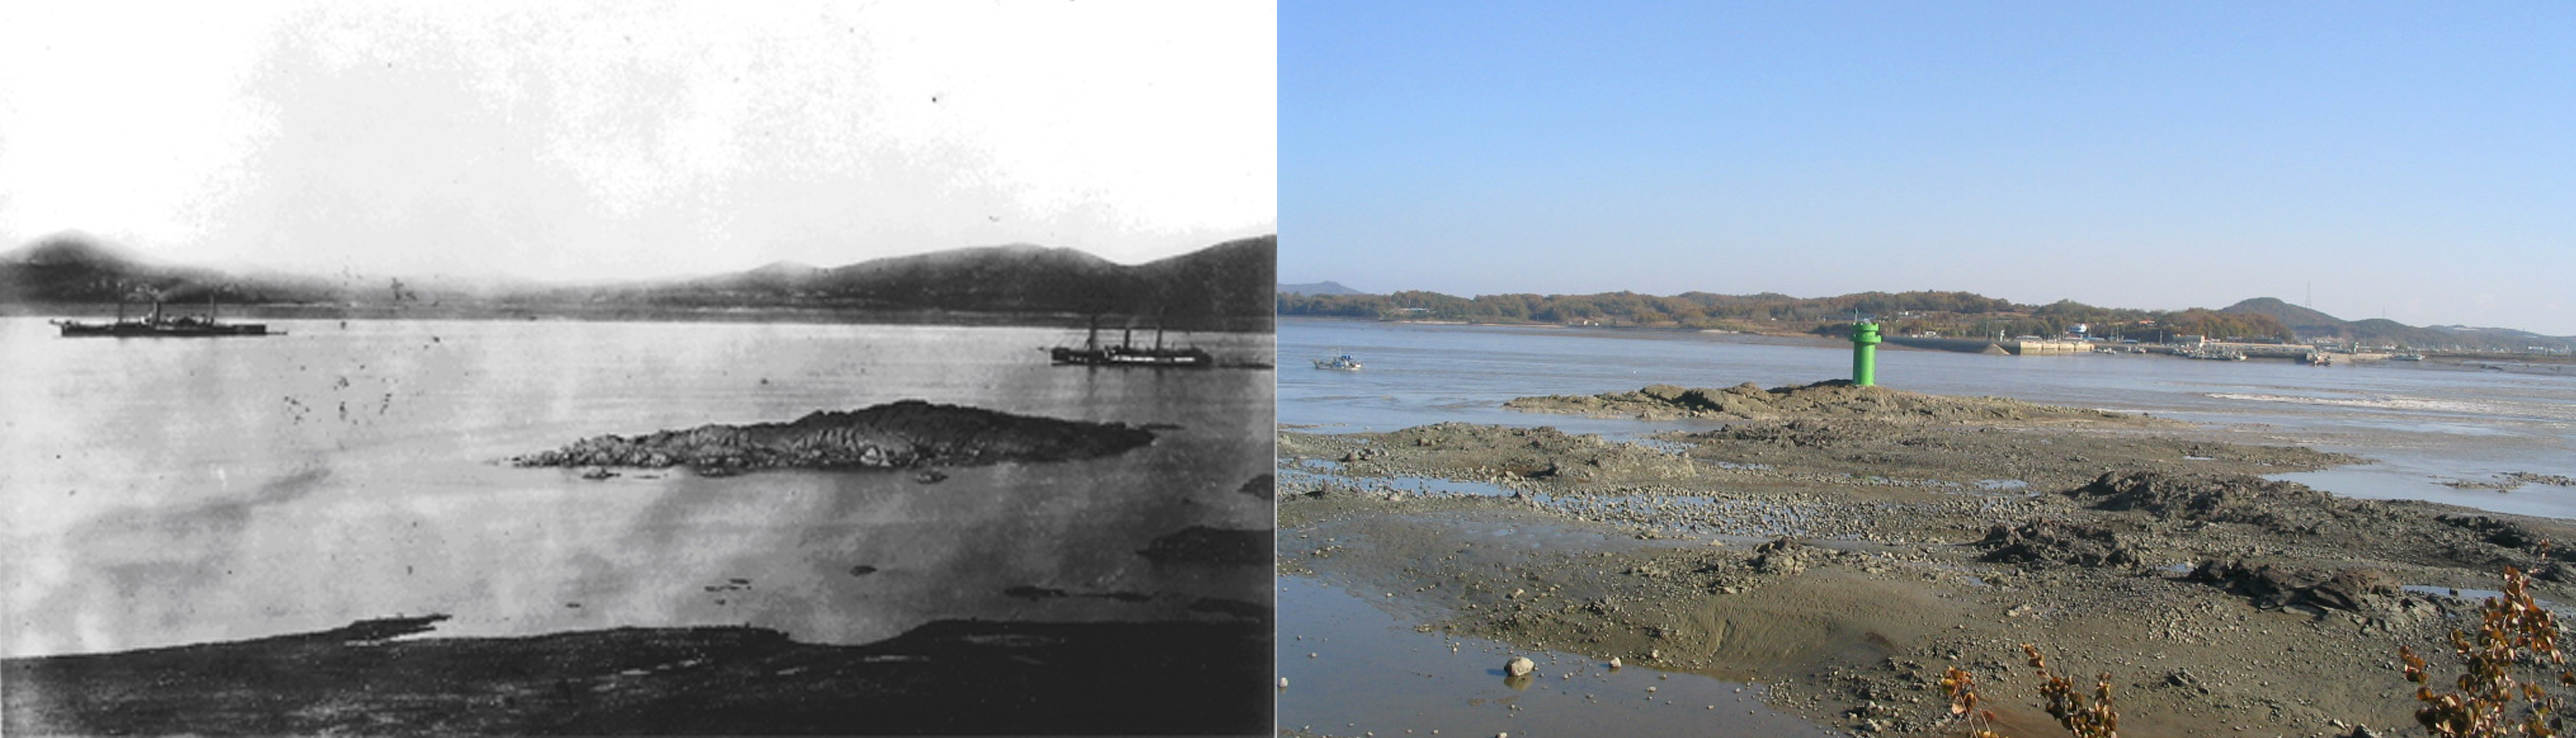 Choji Fort, looking across the Yeomha; Left--1871, Right--2011